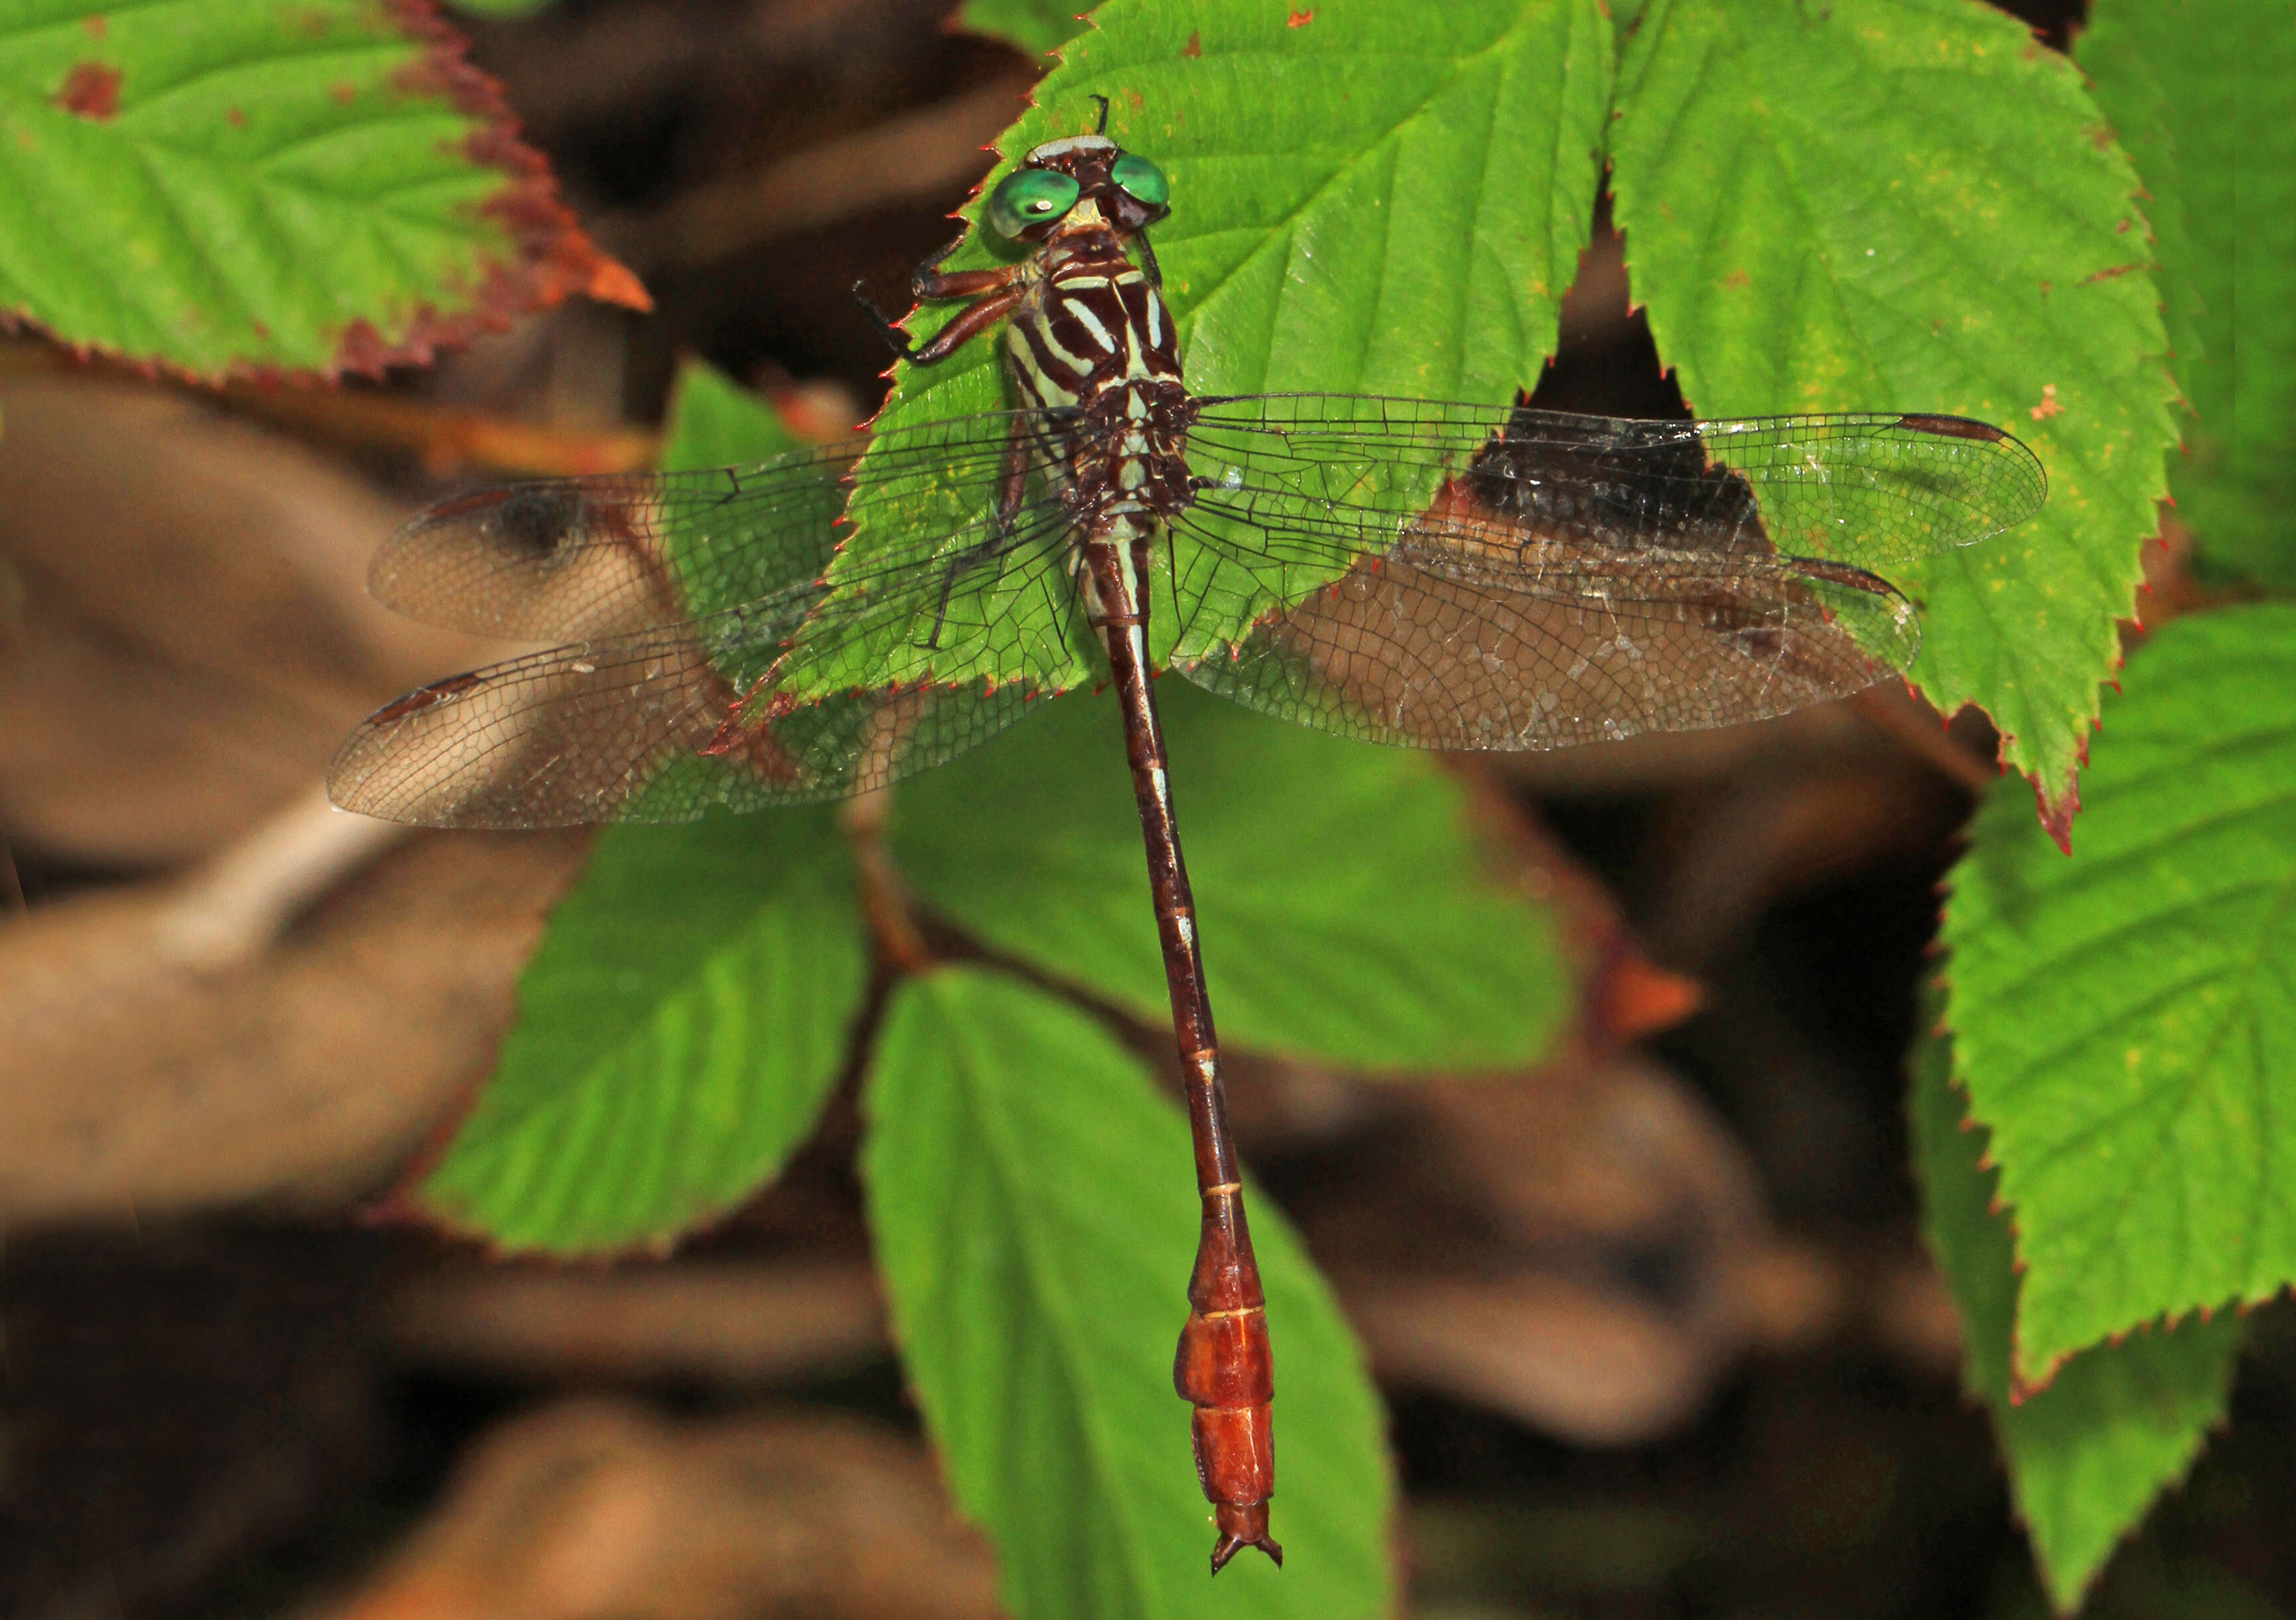 Image of Russet-tipped Clubtail